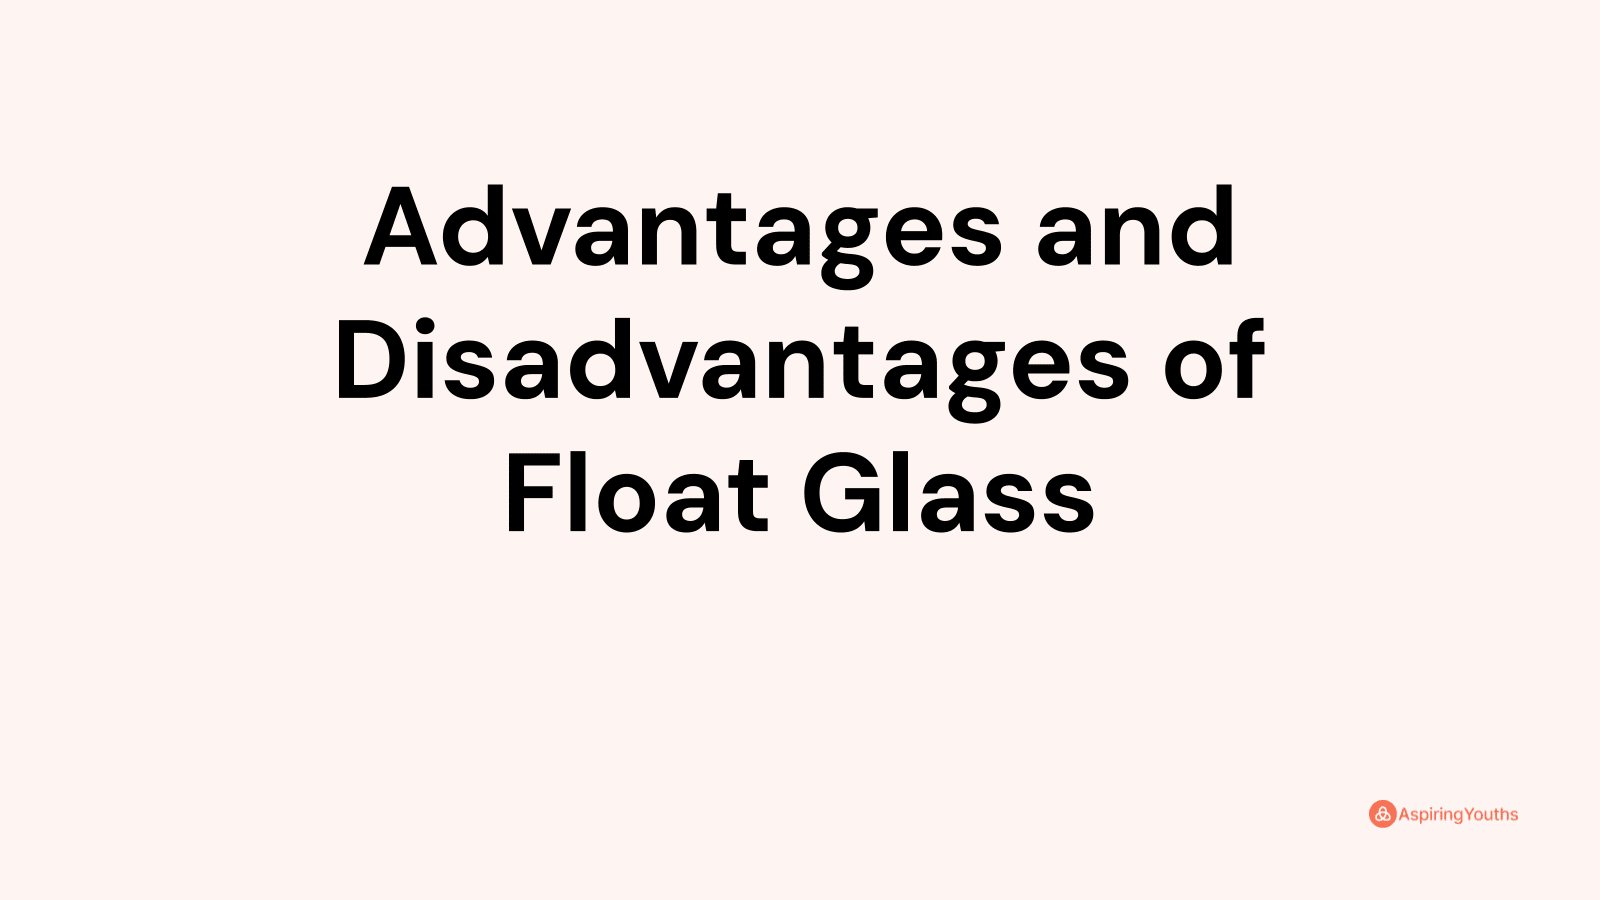 Advantages and disadvantages of Float Glass